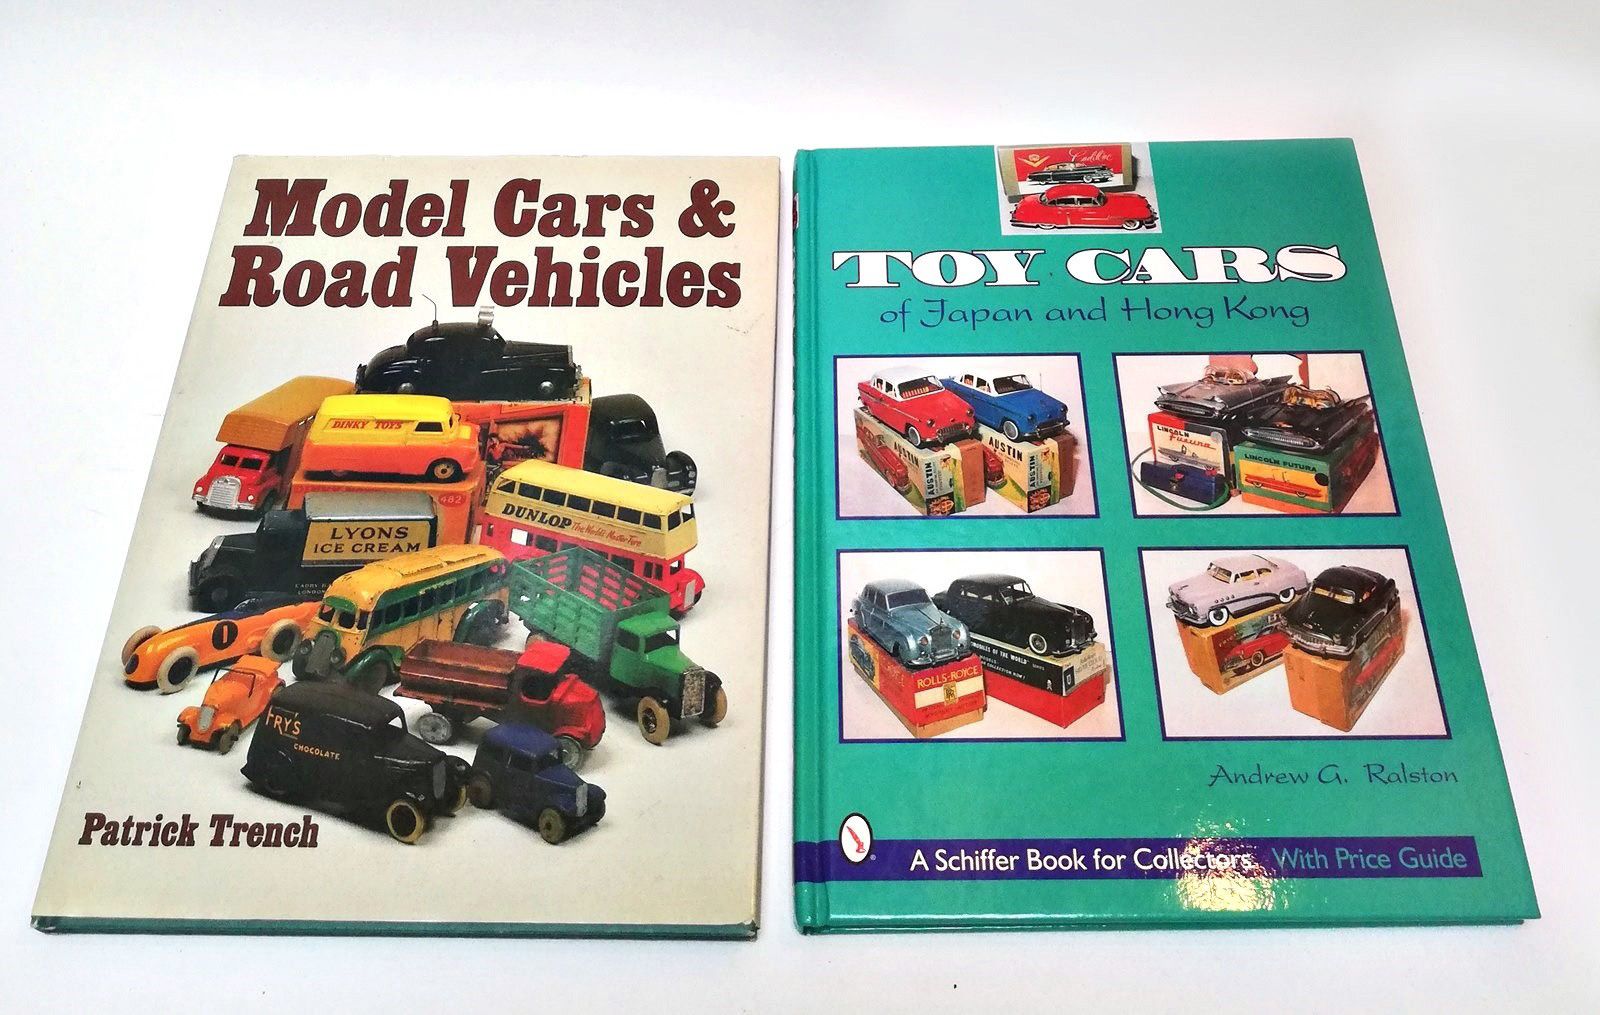 Null Set of 2 volumes:

- Andrew G. Ralston 'Toy Cars of Japan and Hong Kong'. E&hellip;